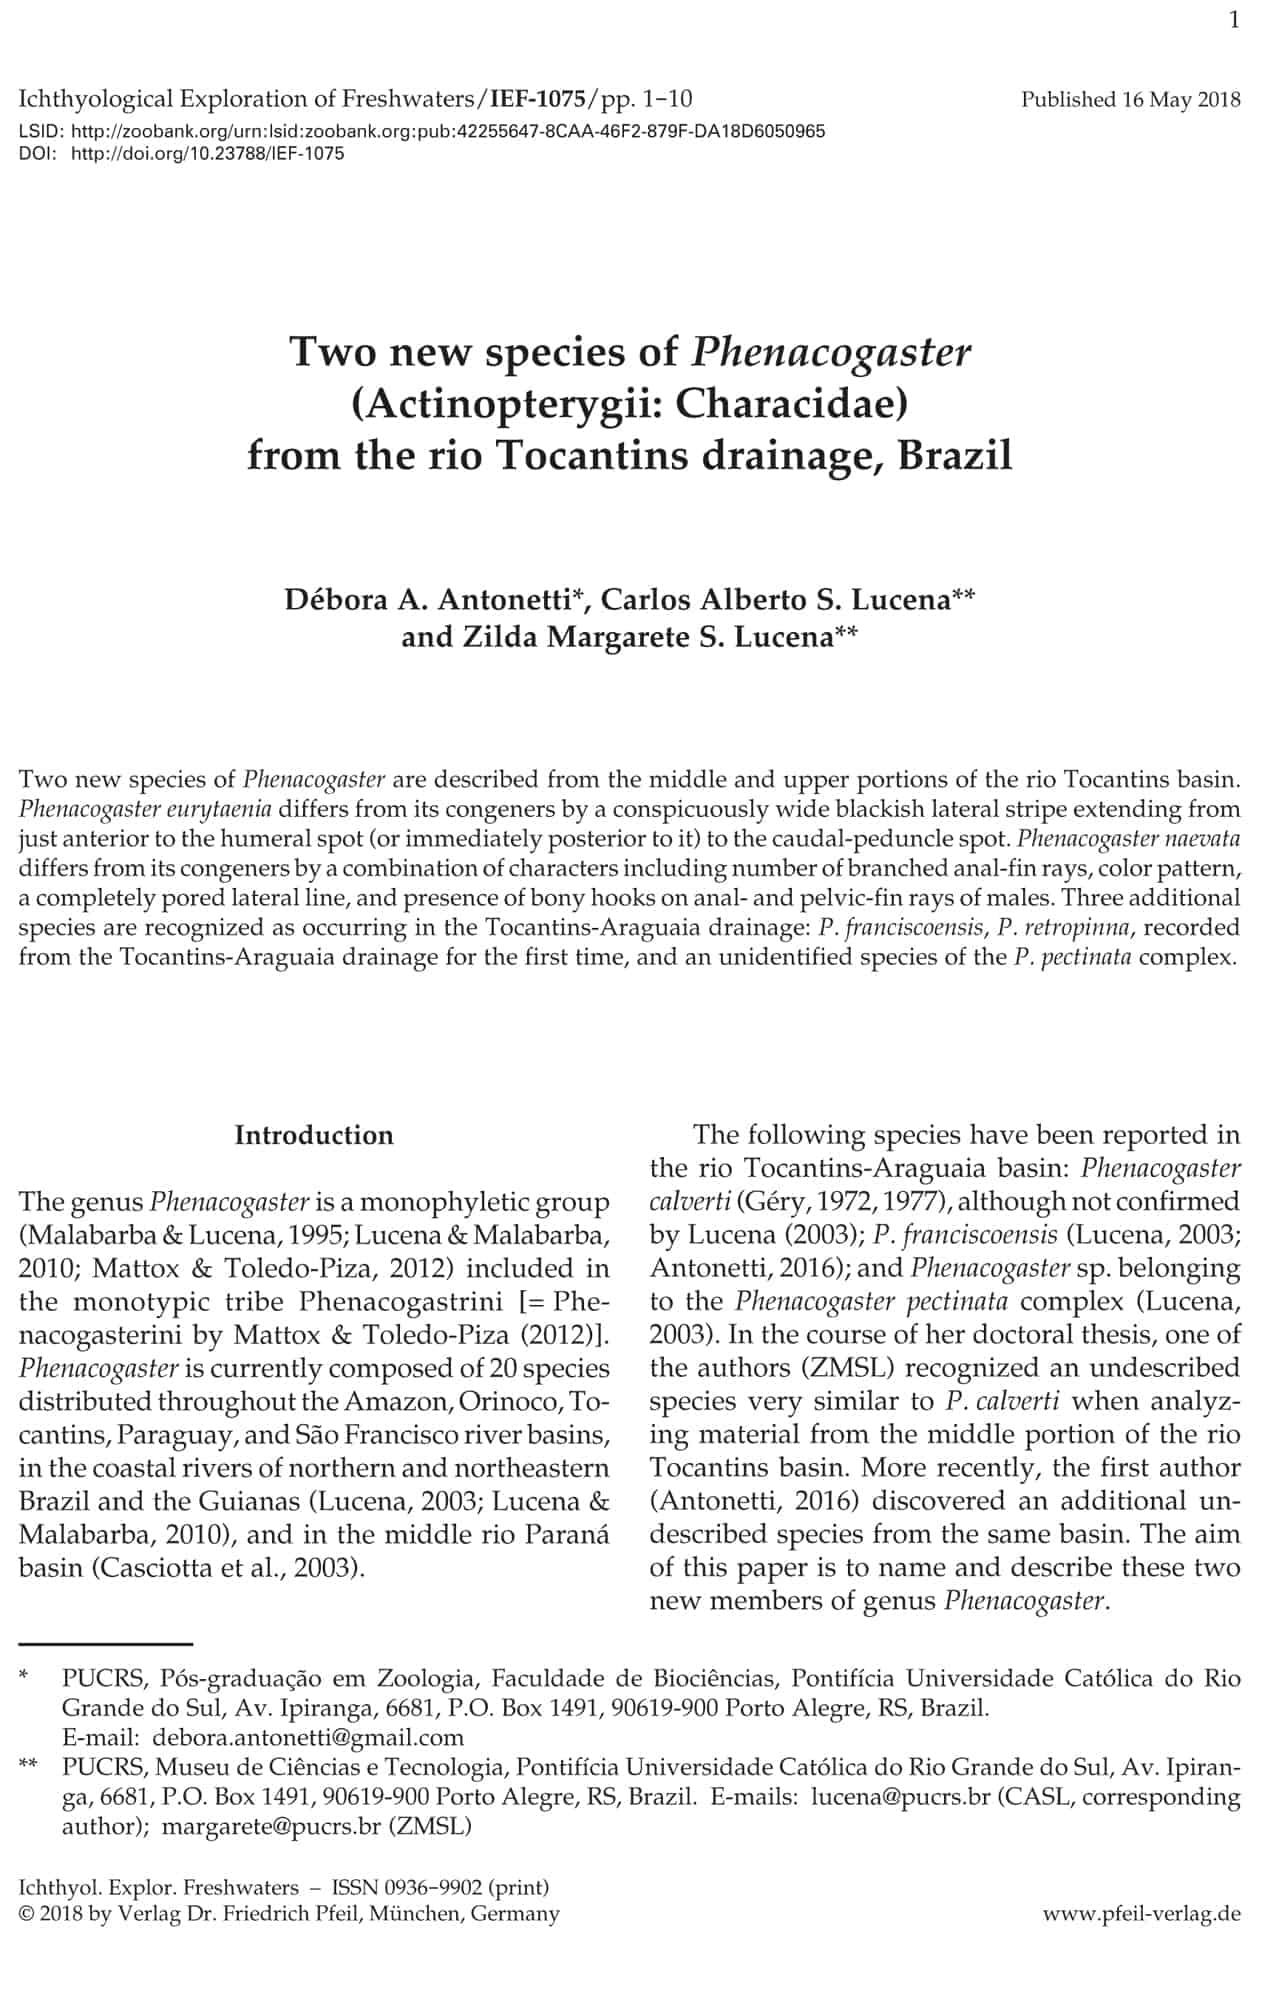 Two new species of Phenacogaster (Actinopterygii: Characidae) from the rio Tocantins drainage, Brazil